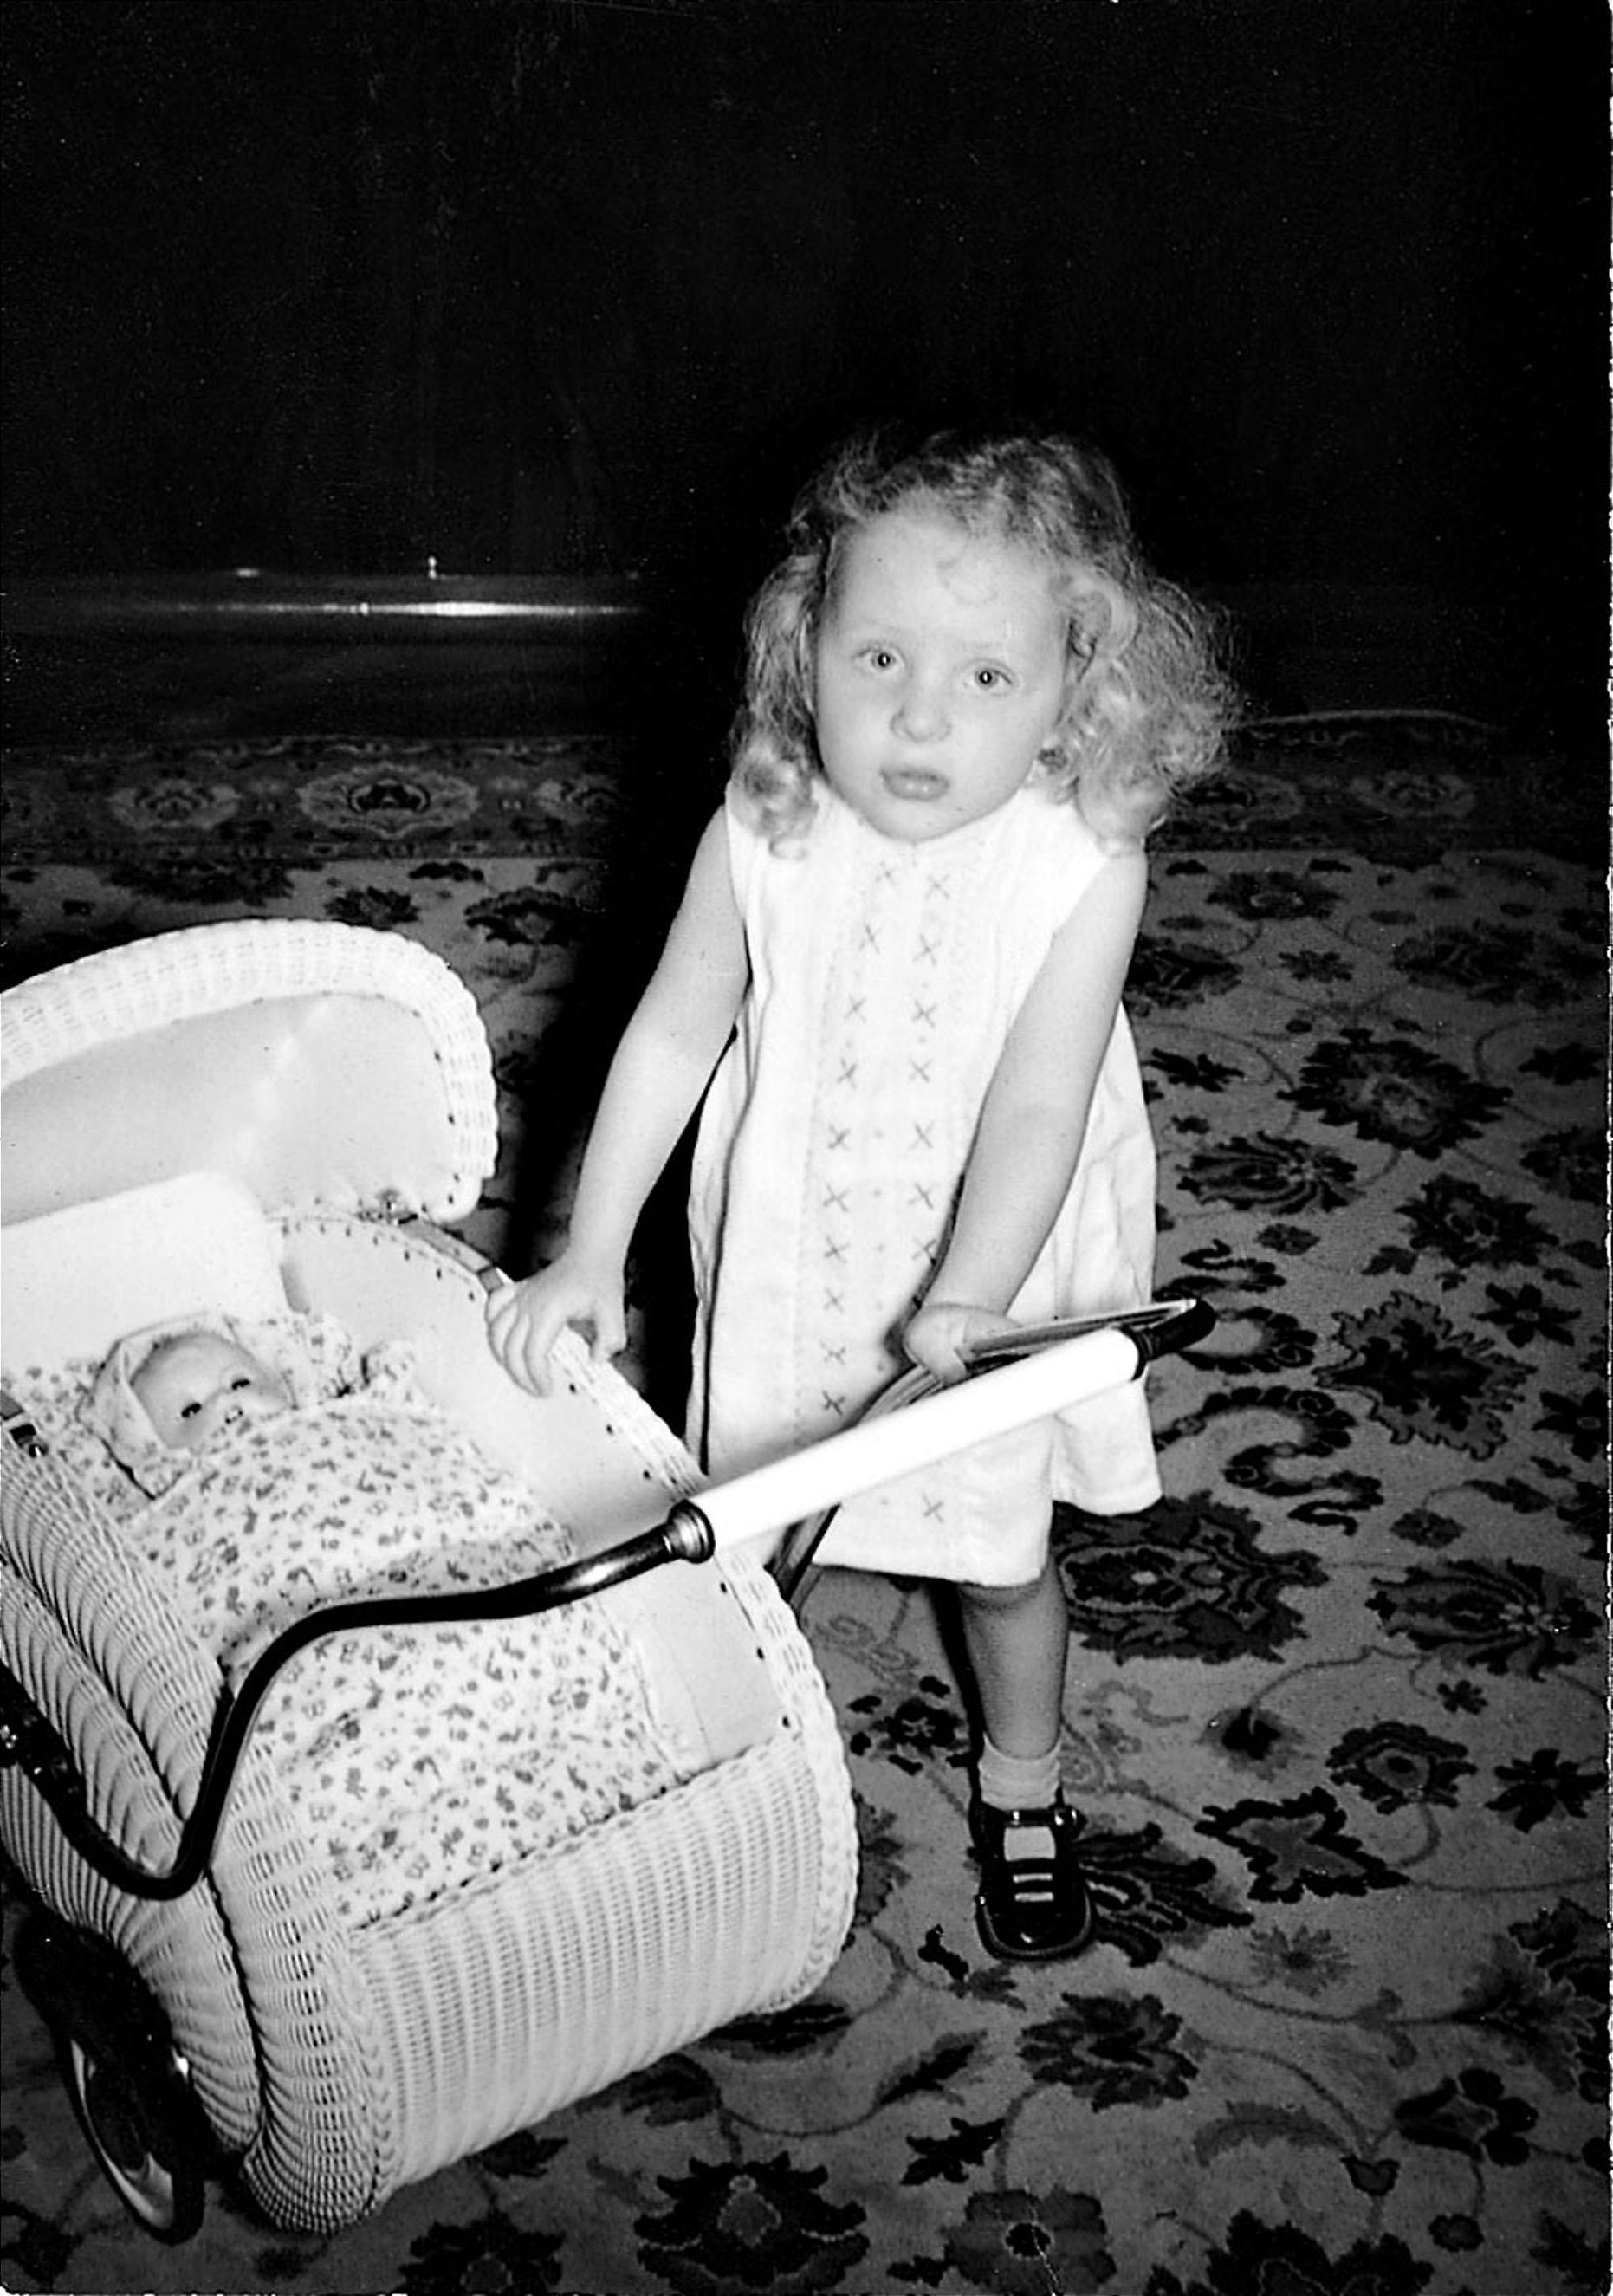 Angela Kasner as a child with a stroller.